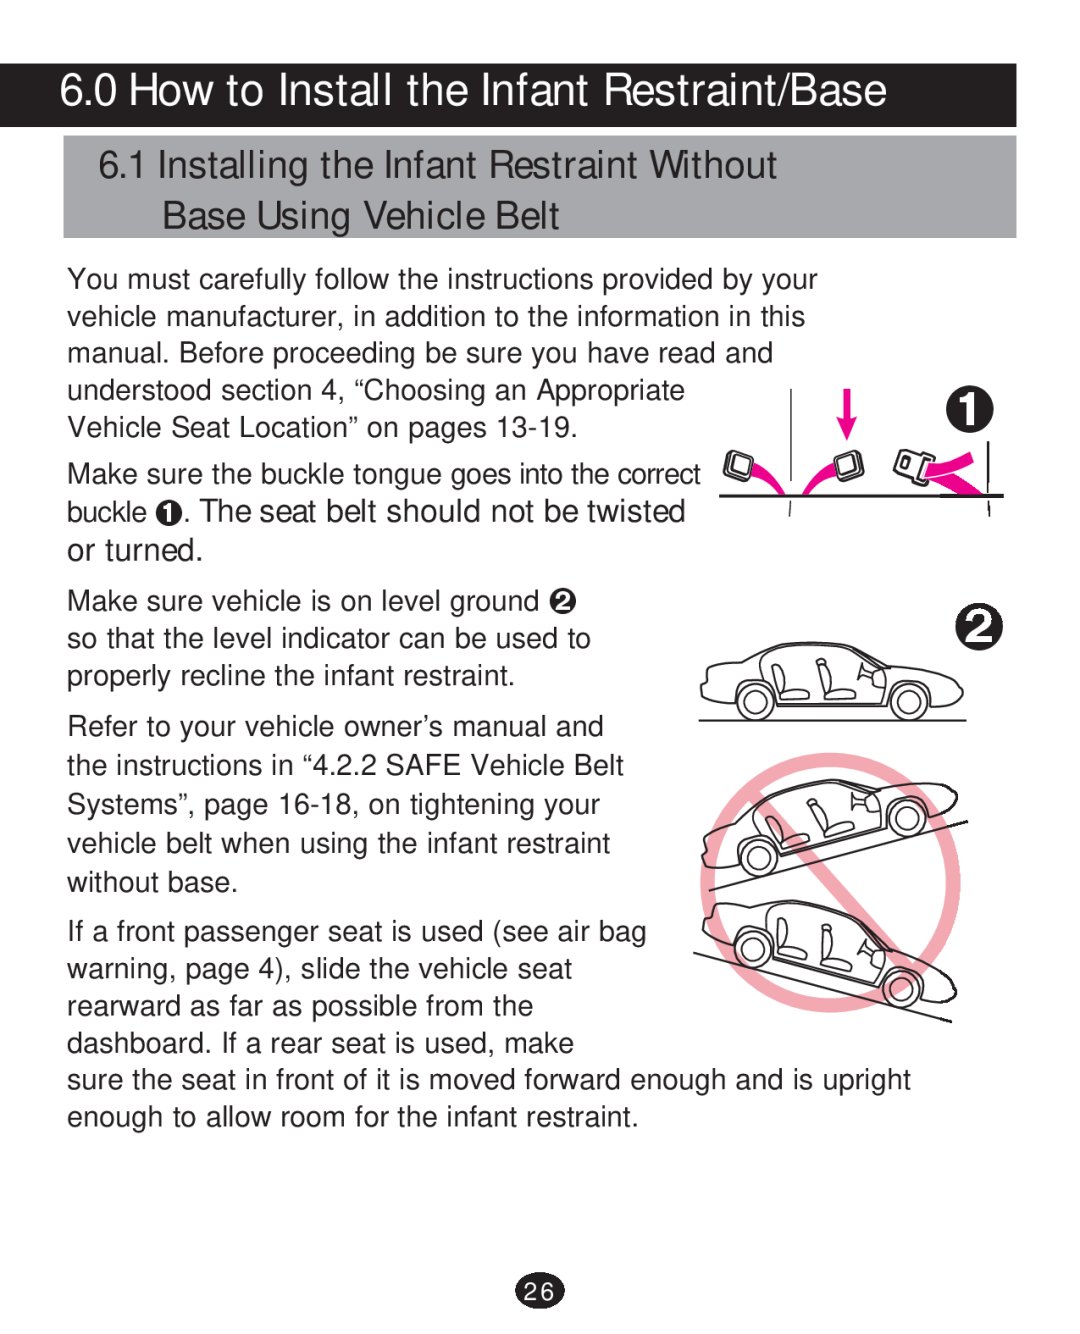 Graco 30 manual How to Install the Infant Restraint/Base, Installing the Infant Restraint Without Base Using Vehicle Belt 